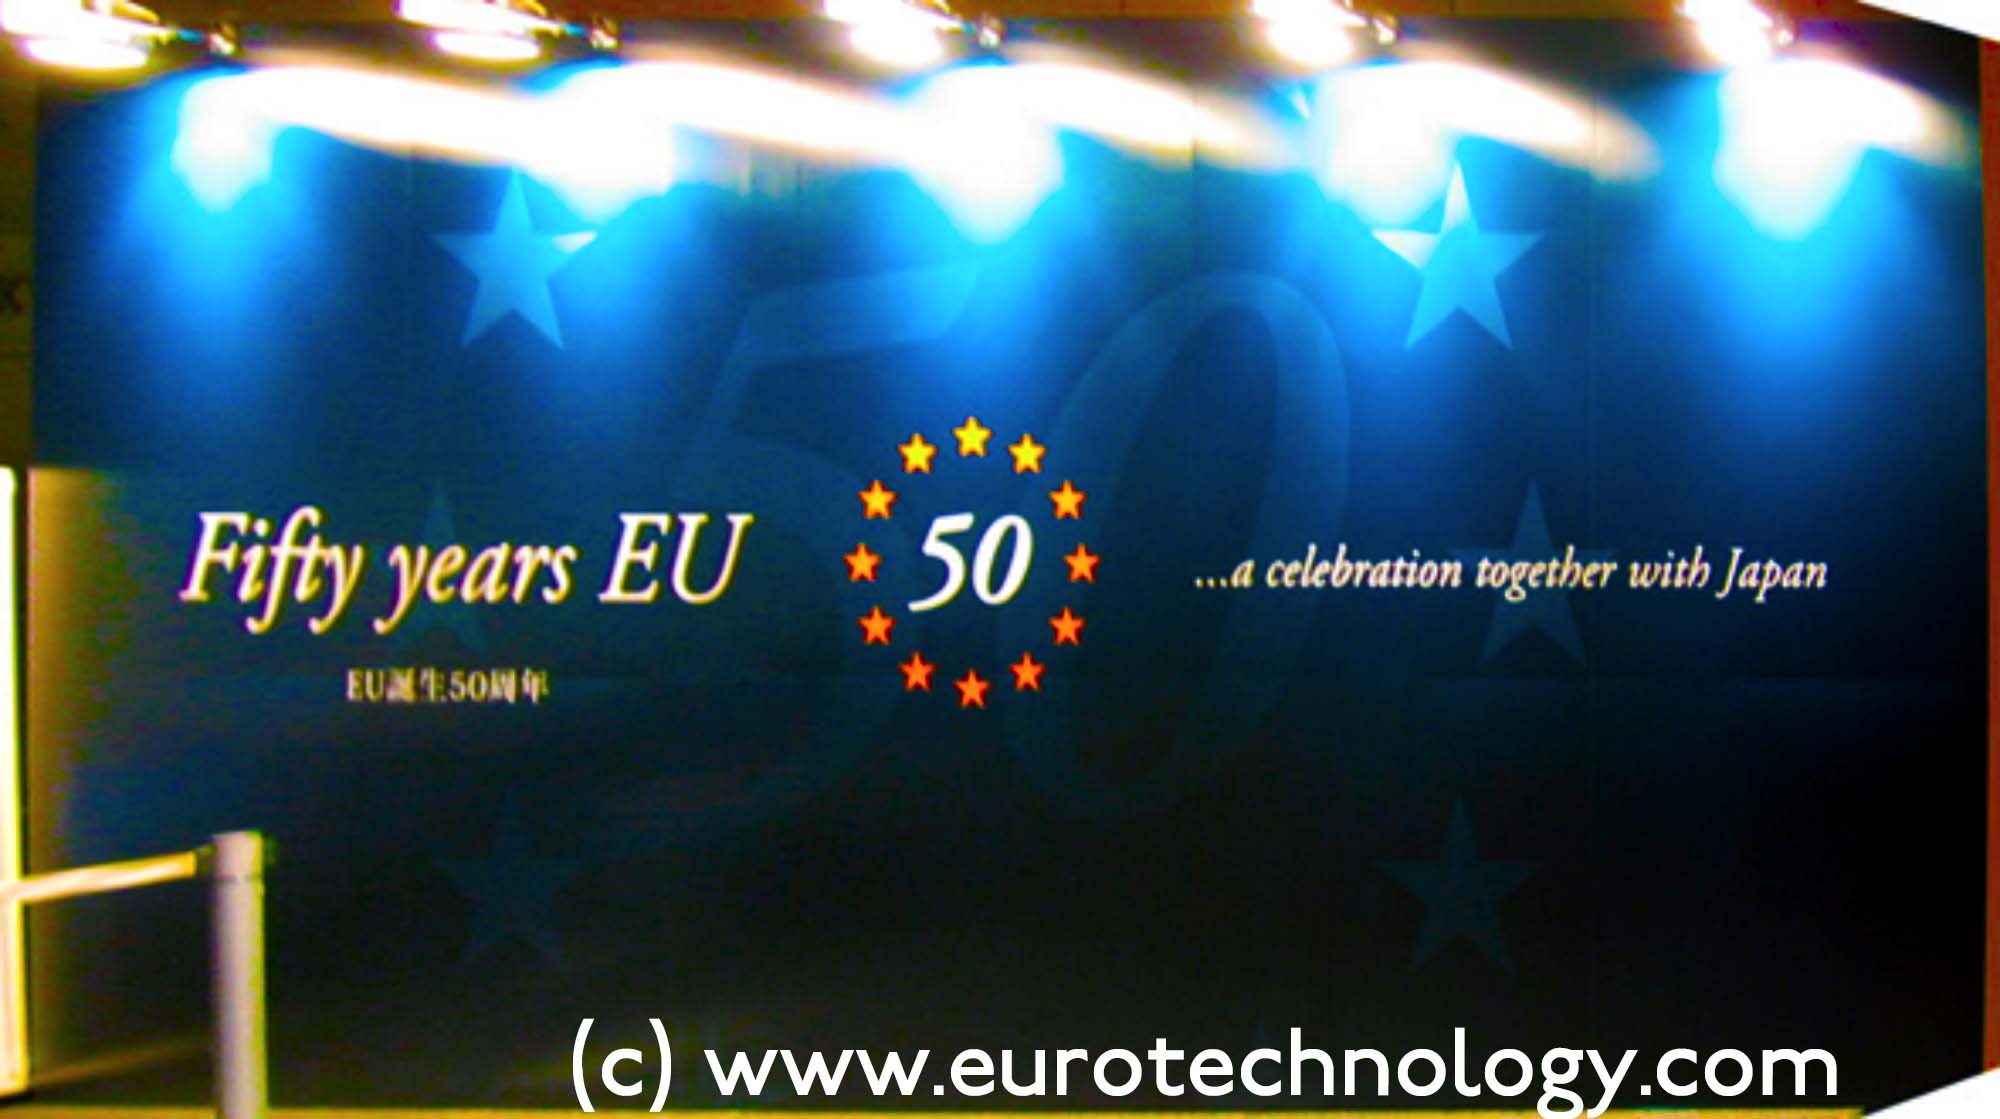 50th anniversary of the Treaty of Rome which was at the beginning of the European Union